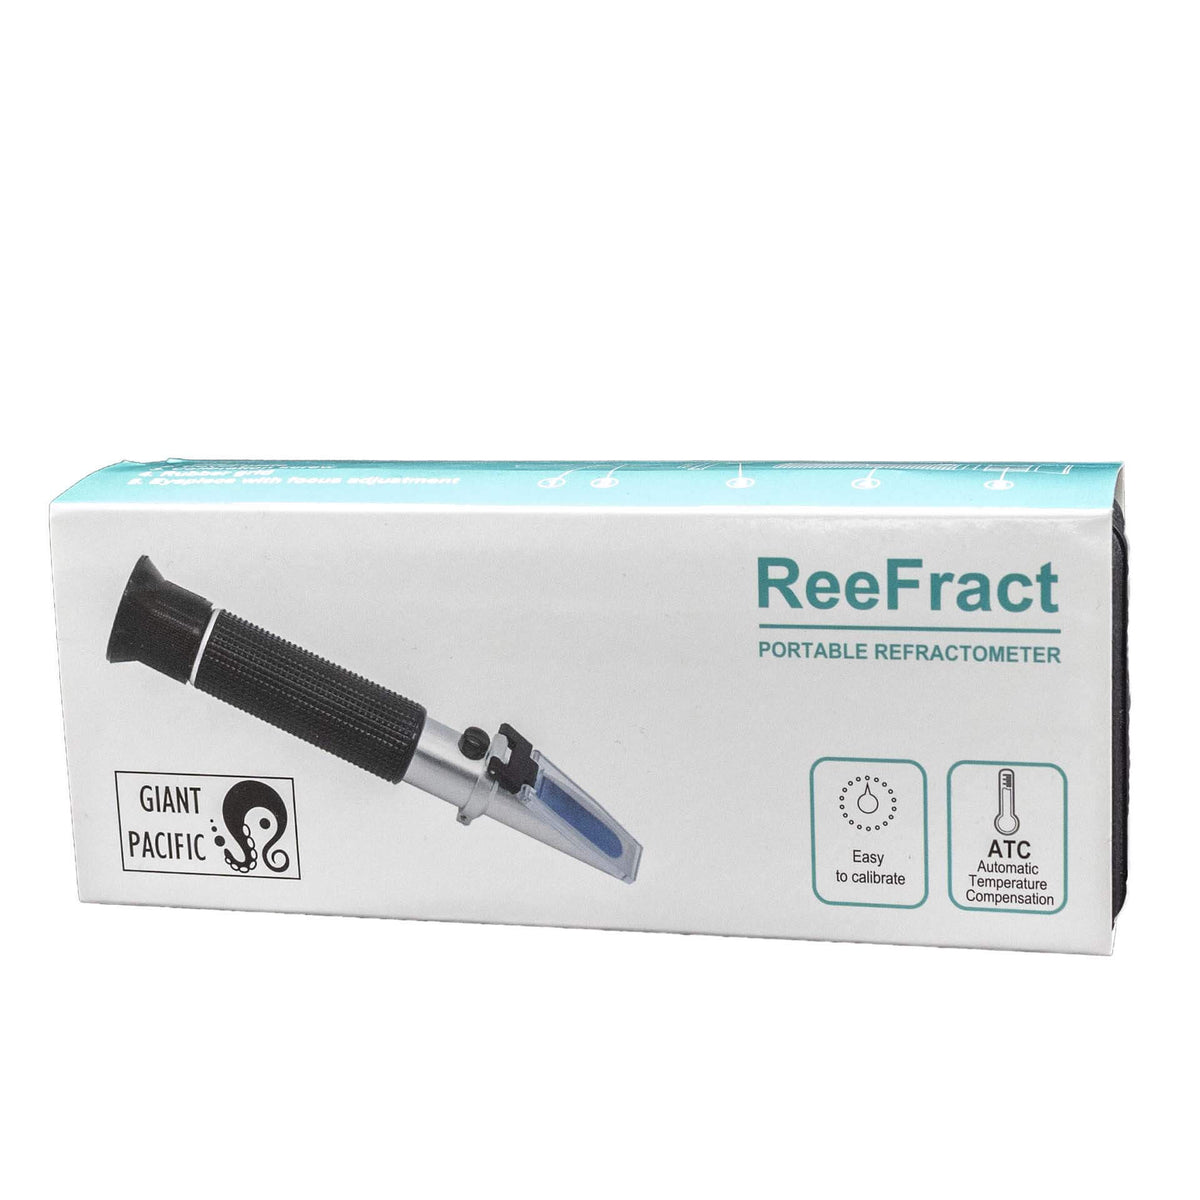 Giant Pacific ReeFract - Portable Refractometer